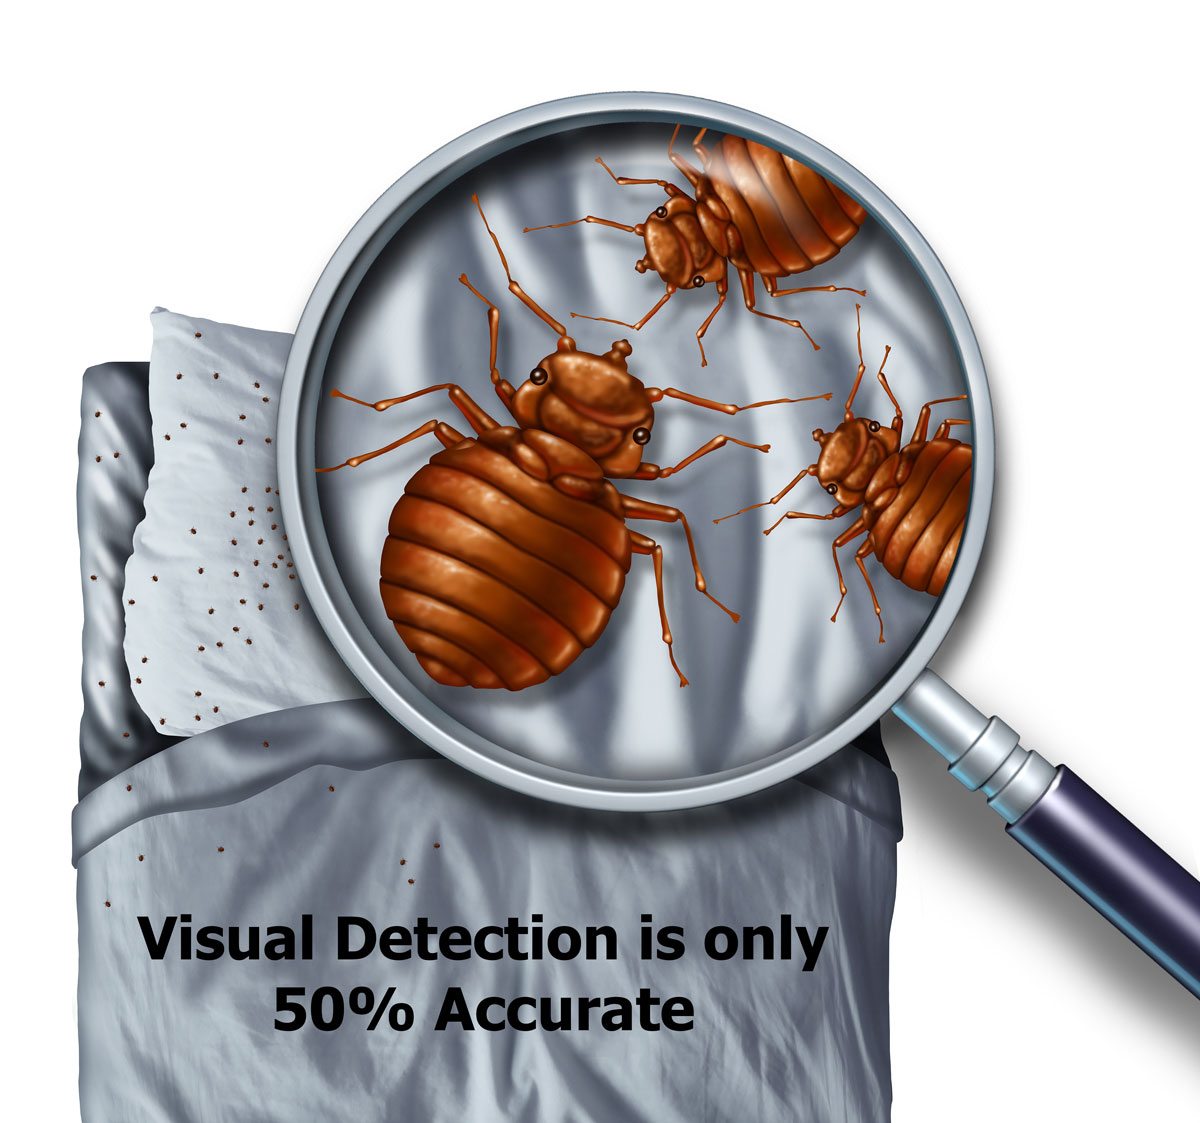 Visual Bed Bug detection is only 50% accurate